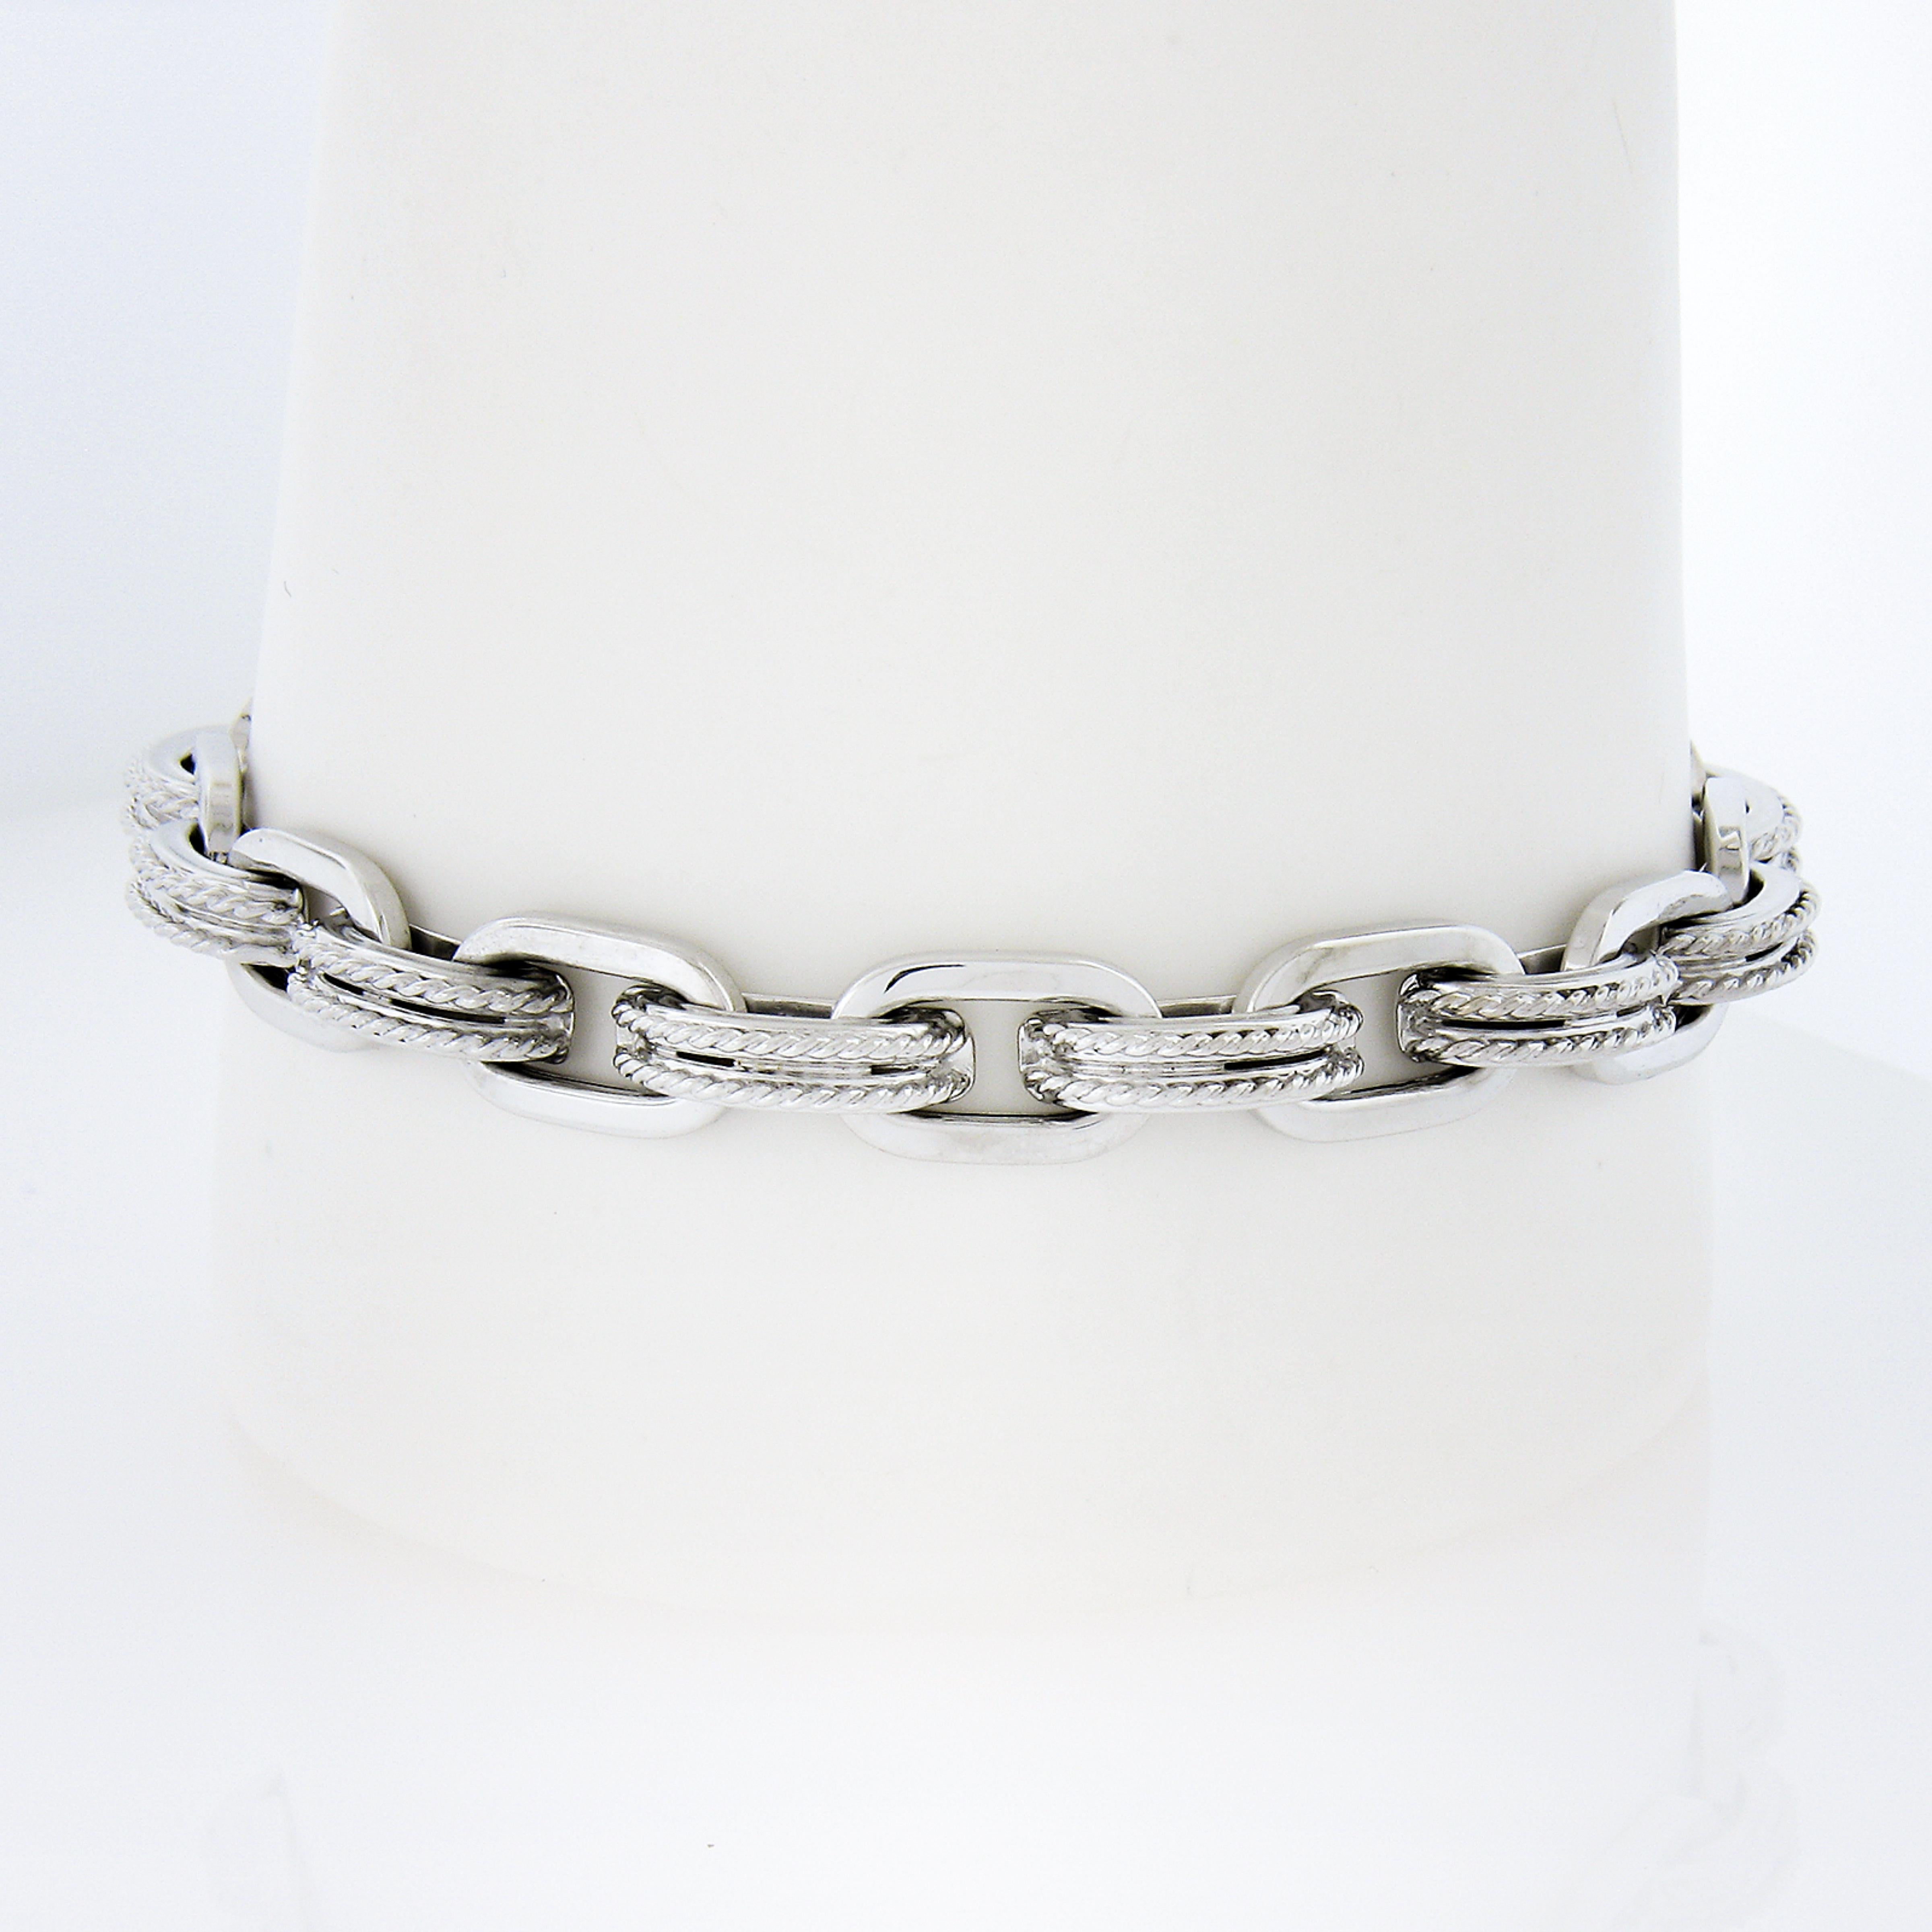 Material: Solid 18K White Gold
Weight: 17.59 Grams
Chain Type: Alternated Polished & Twisted Wire Oval Link
Chain Length: Will comfortably fit up to a 7.25 Inch wrist (Measured next to a ruler & Fitted on a wrist)
Clasp: Large Spring Ring